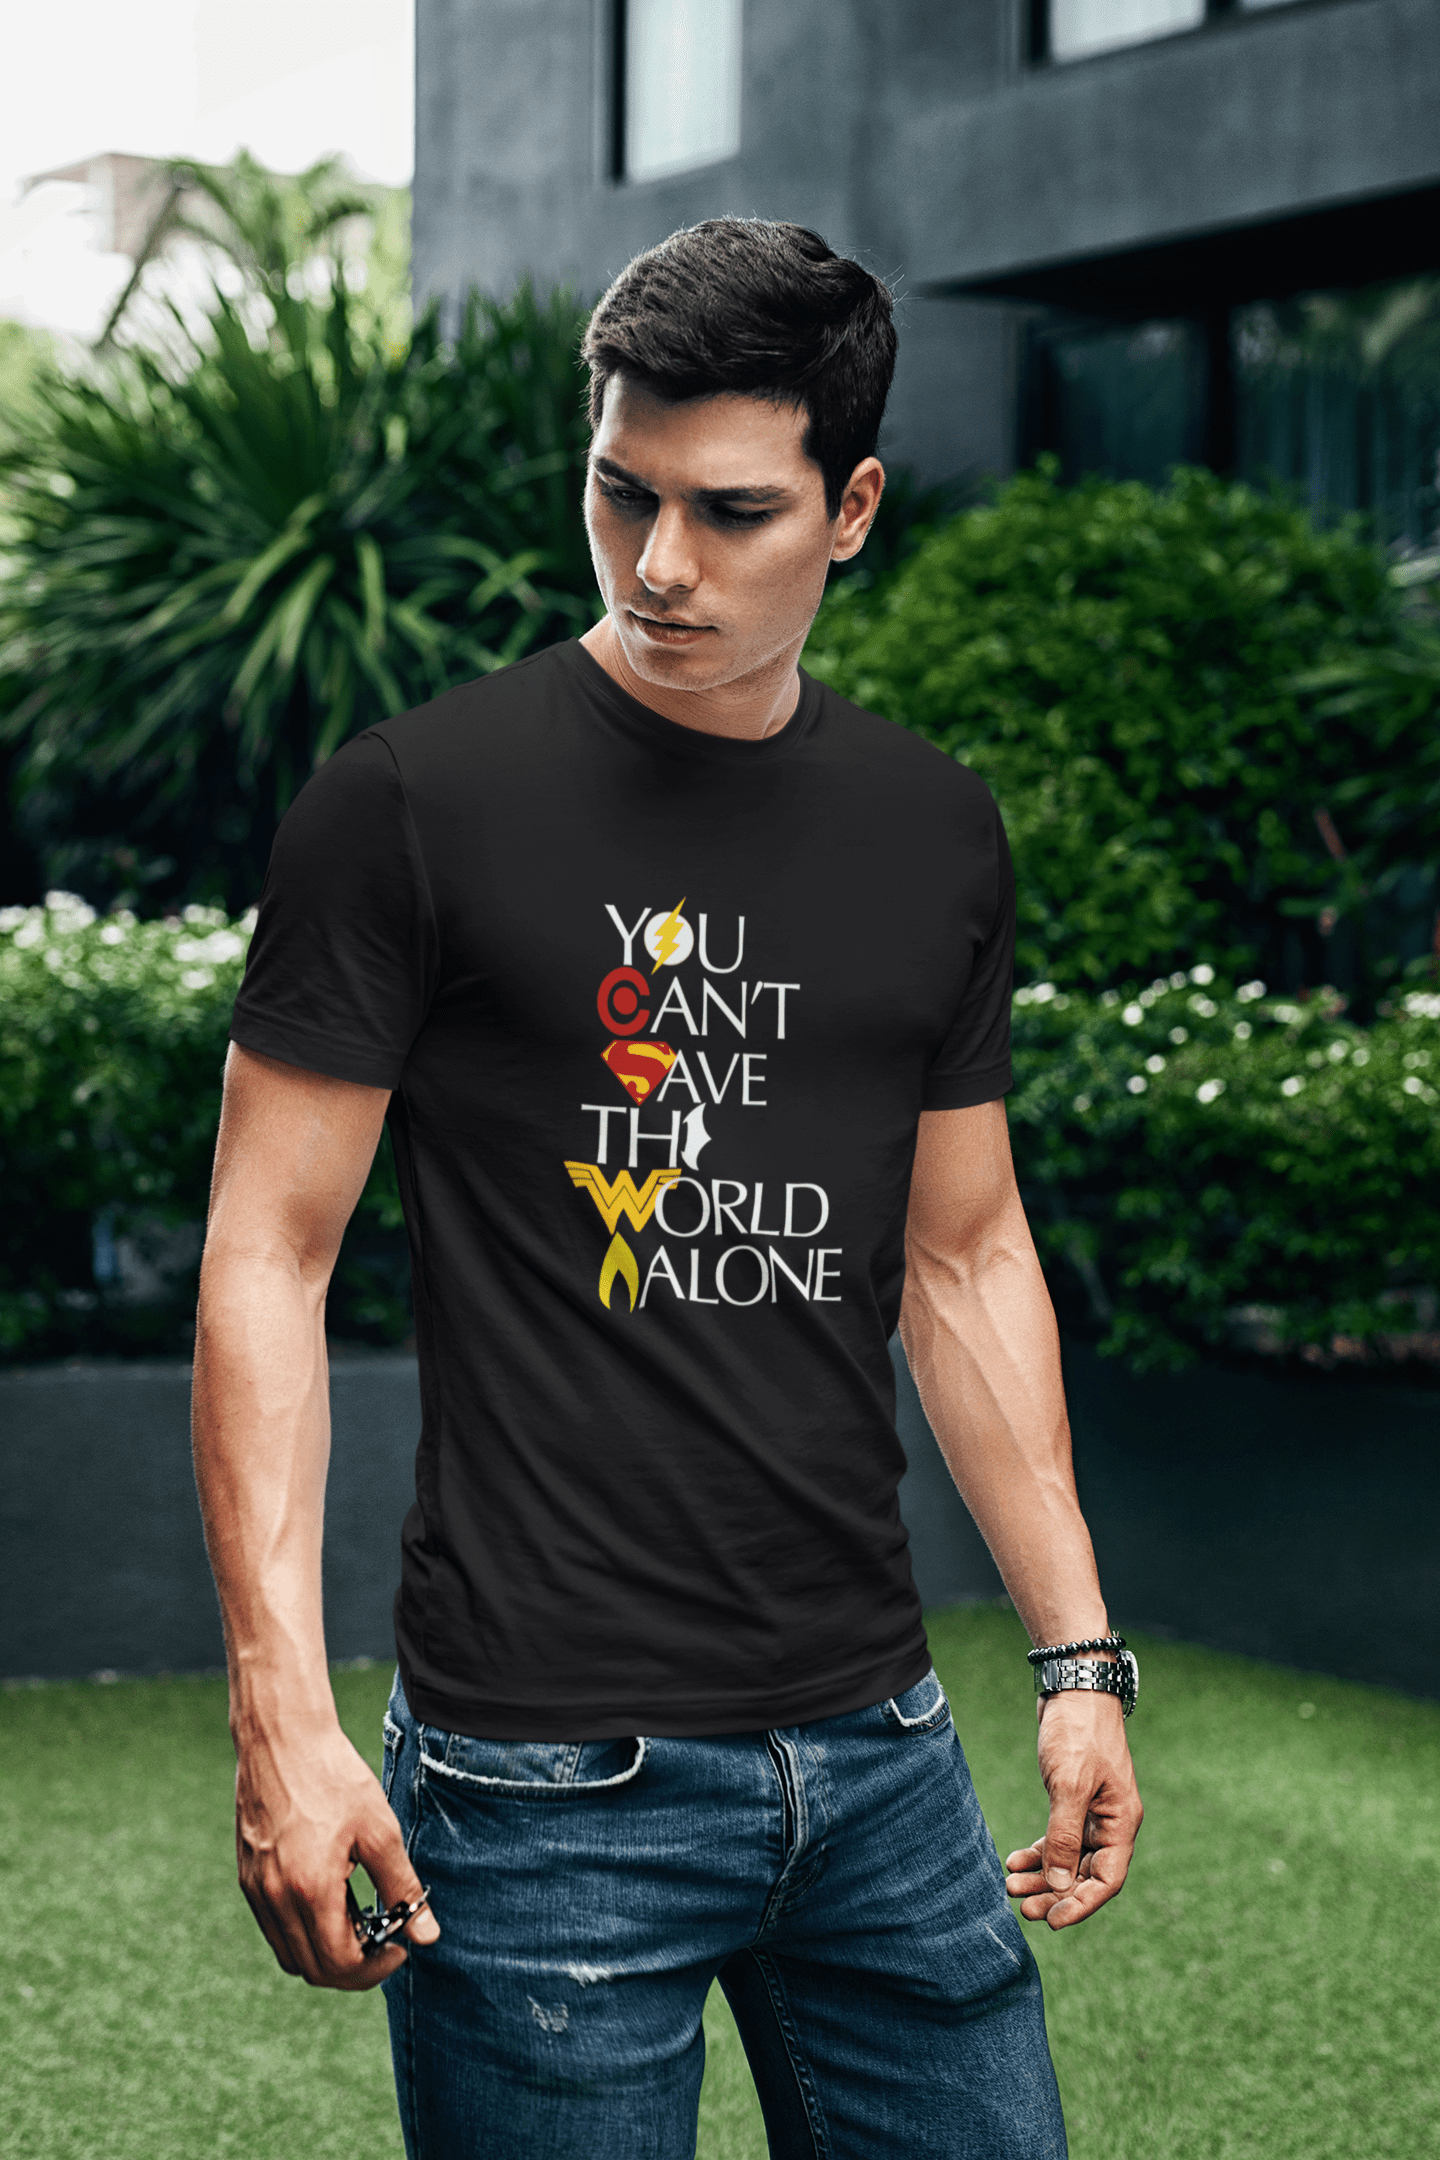 " YOU CAN'T SAVE THE WORLD ALONE " HALF-SLEEVE T-SHIRTS BLACK